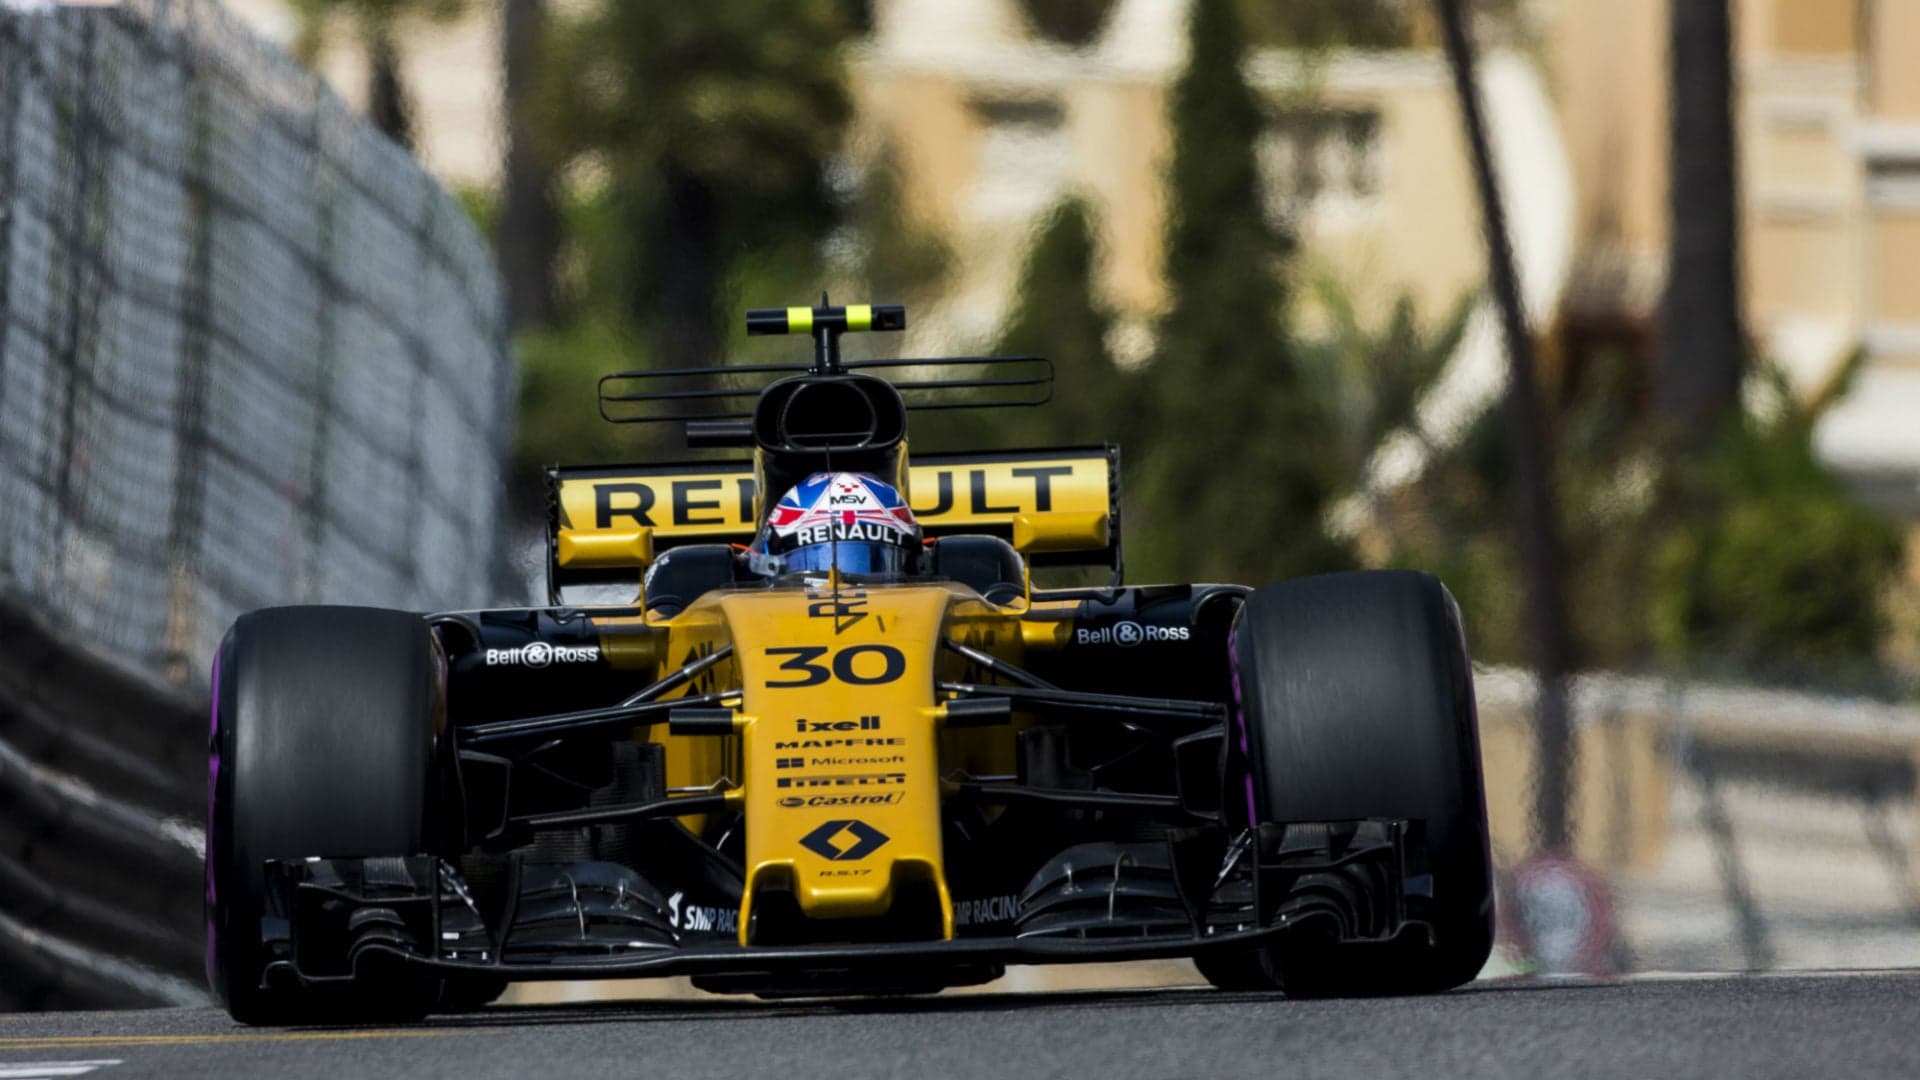 Renault F1 Working on ‘Completely New Car’ for Next Season